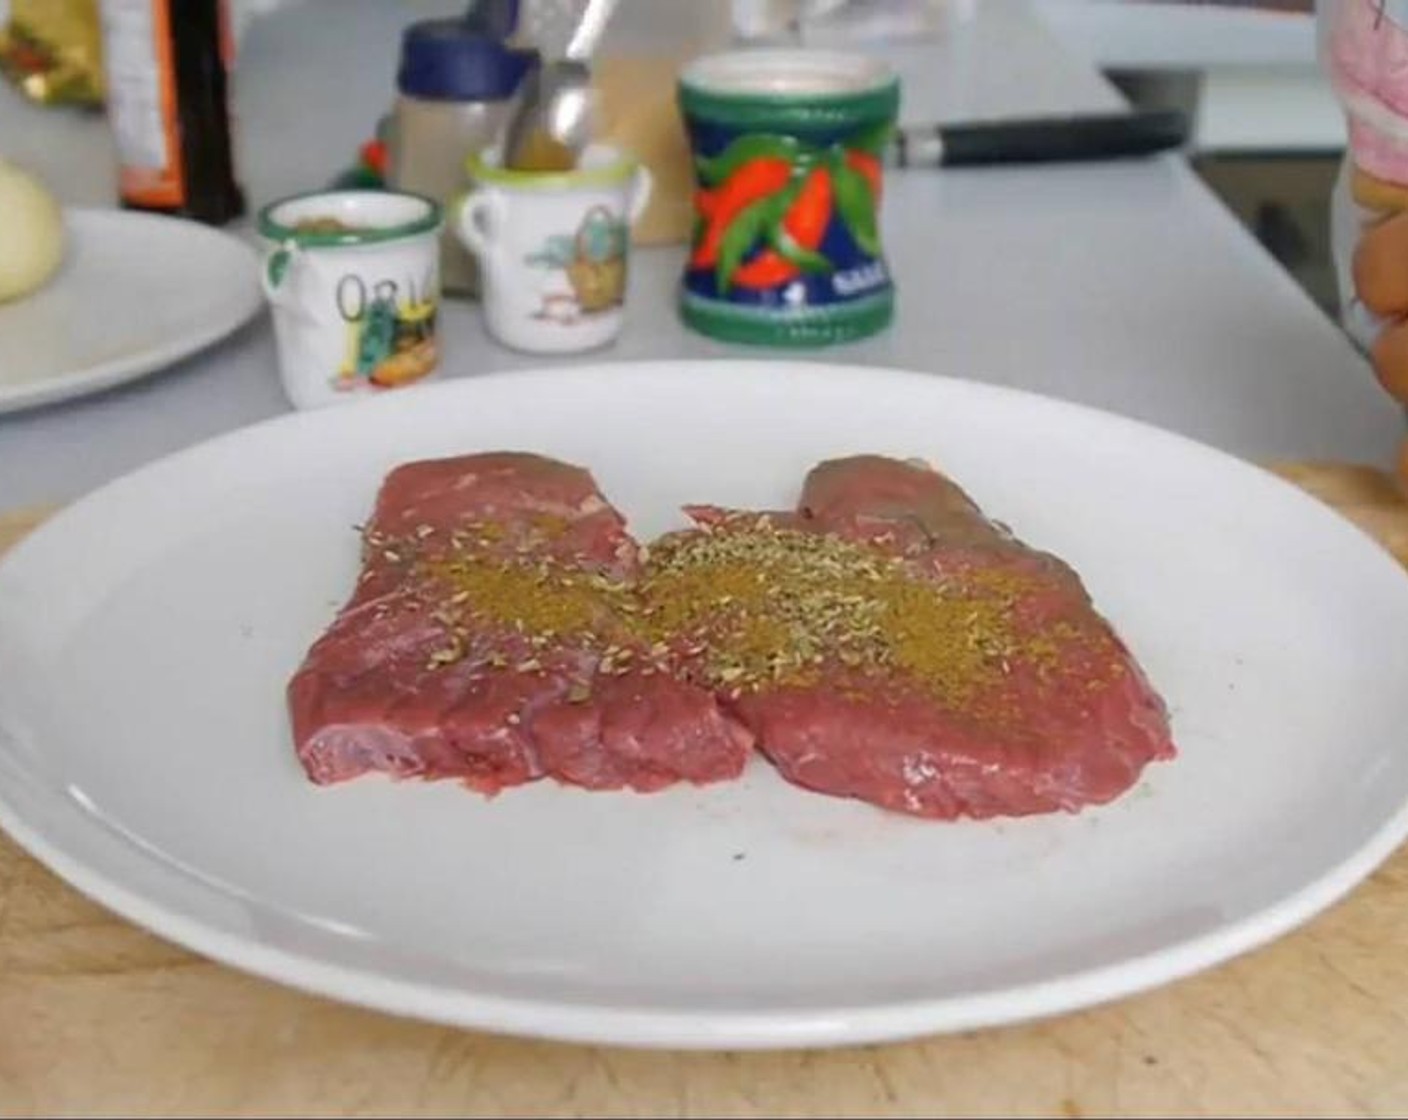 step 1 So the first thing to do is to season the Beef Steak (1), and for this I’m using my go to marinate made of Dried Oregano (1/2 tsp), Ground Cumin (1/4 tsp), Salt (1/4 tsp), Worcestershire Sauce (1 Tbsp), and Garlic (1/4 tsp).